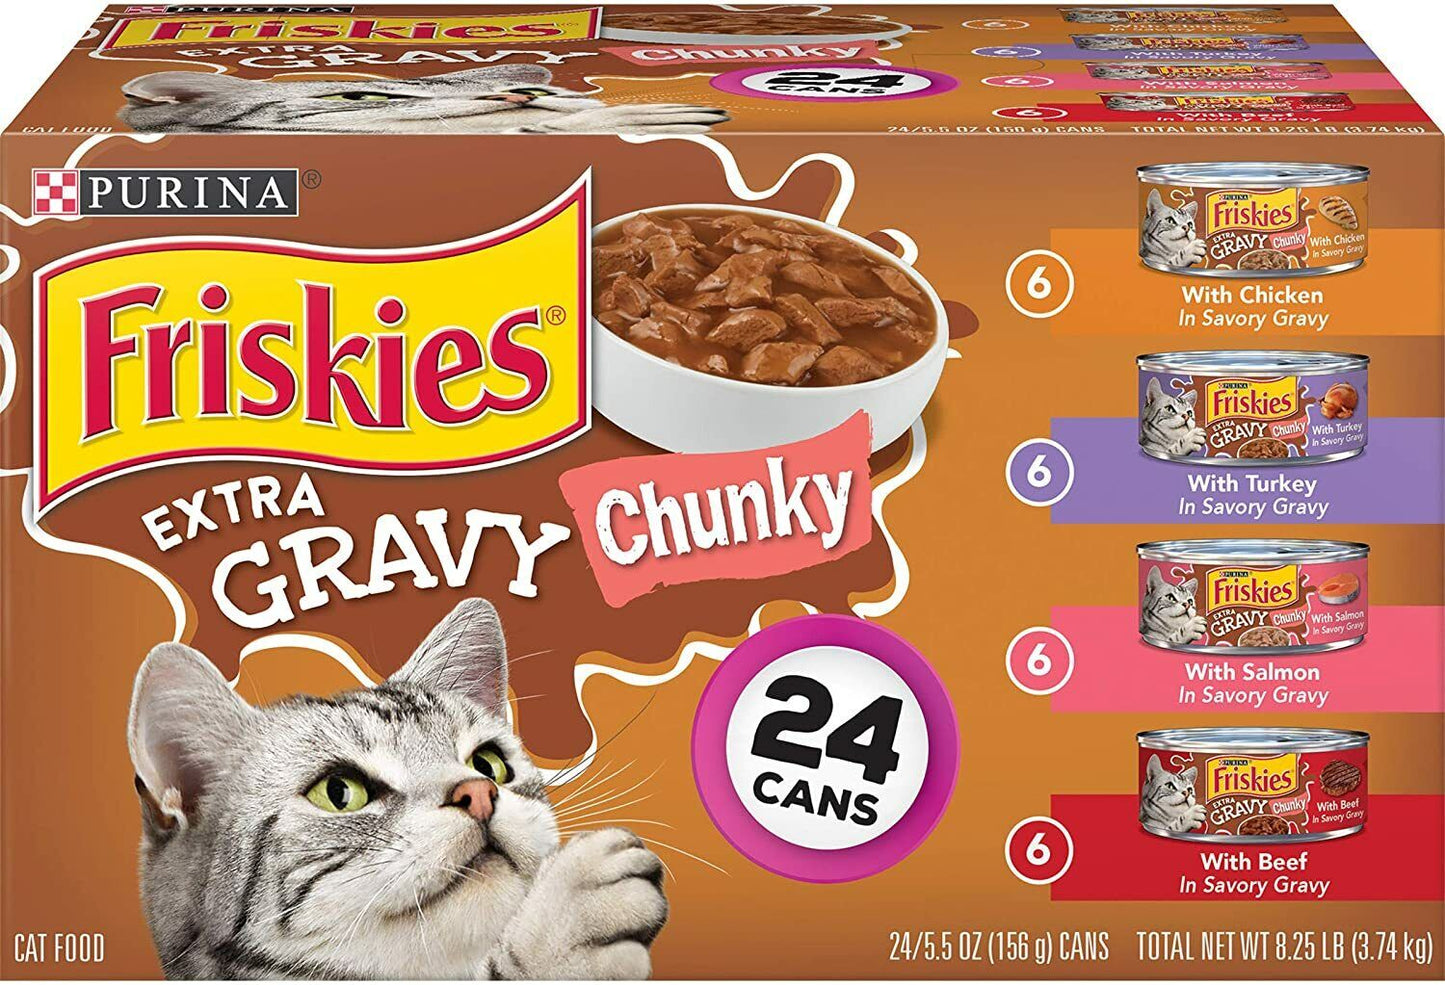 Purina Friskies Extra Gravy Chunky Variety Pack Wet Cat Food, 5.5 oz, 24 Cans